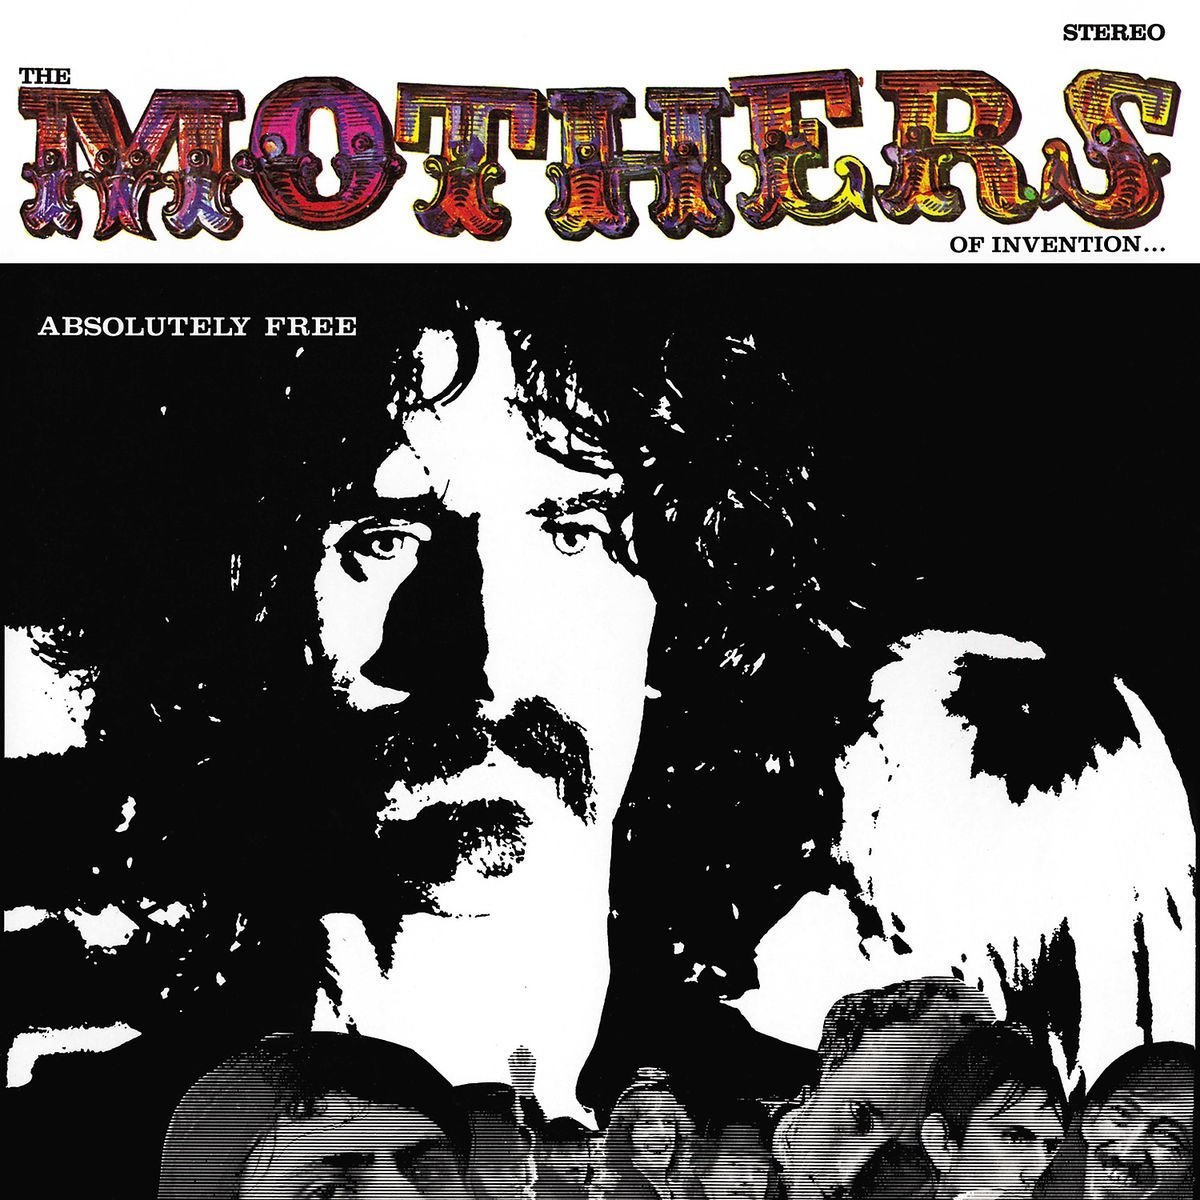 Absolutely Free - Vinyl | Frank Zappa, The Mothers of Invention